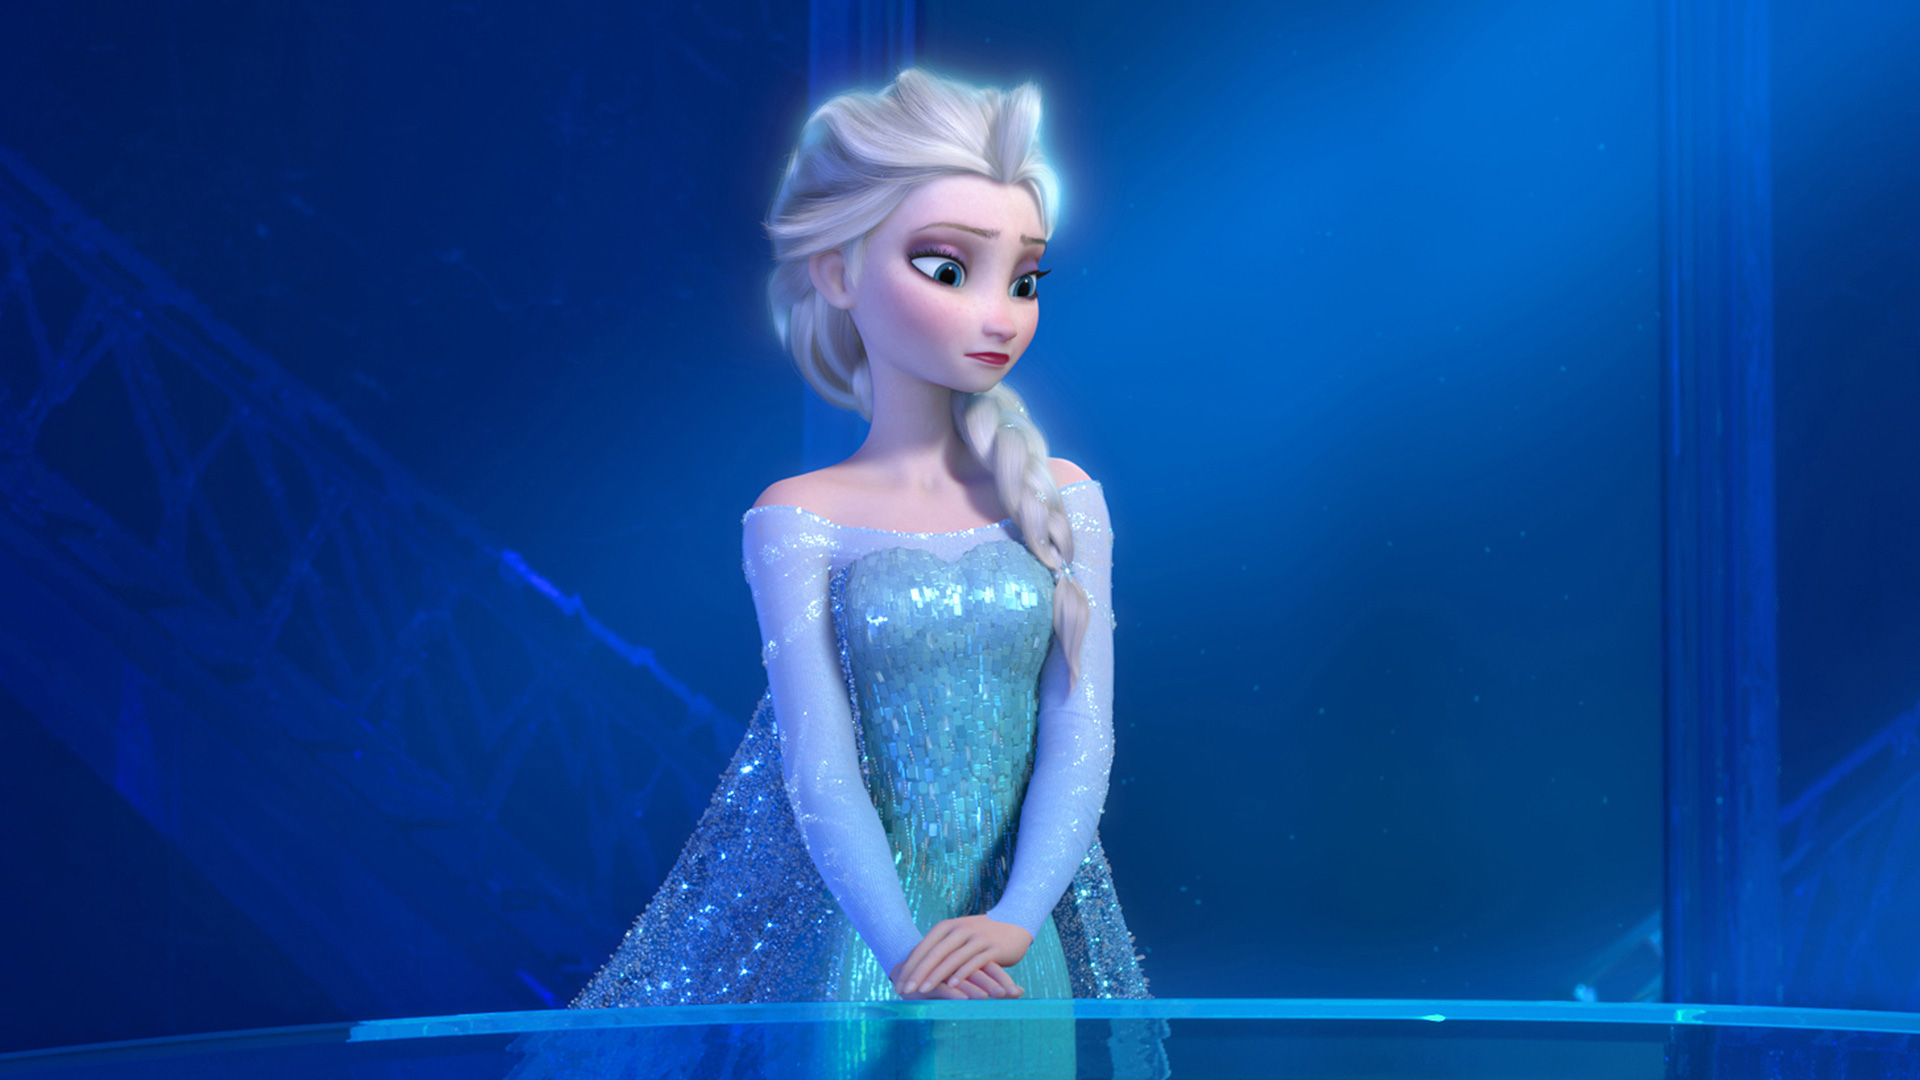 November 27, 2013: “Frozen” Was Released in Theaters